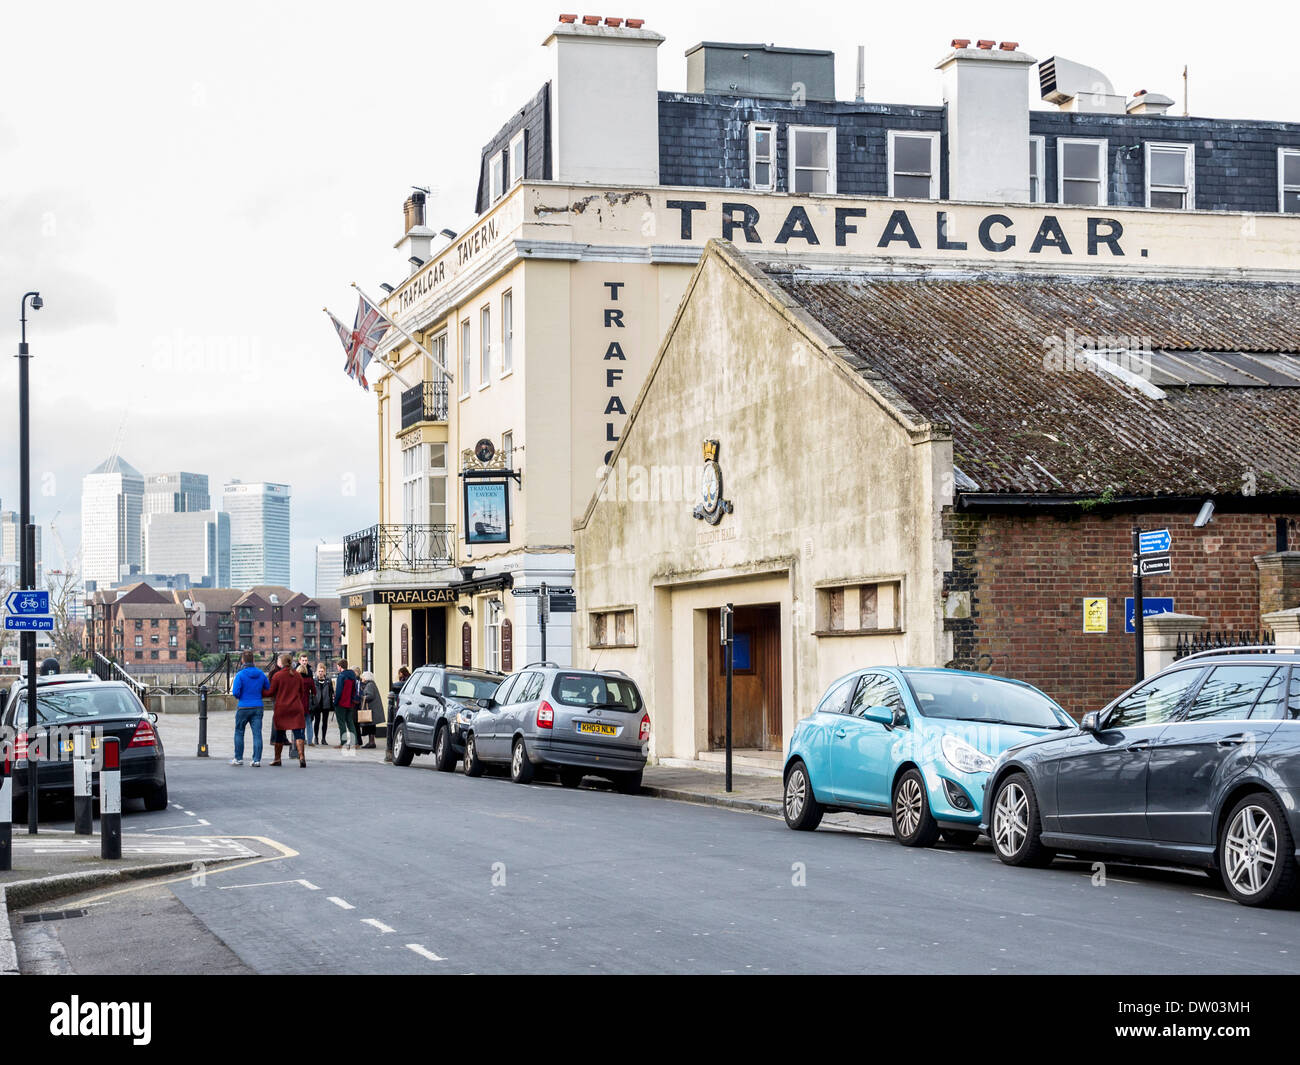 Trafalgar tavern pub, Trident hall stone building in Greenwich with Canary Wharf Financial Centre in the distance, London, UK Stock Photo